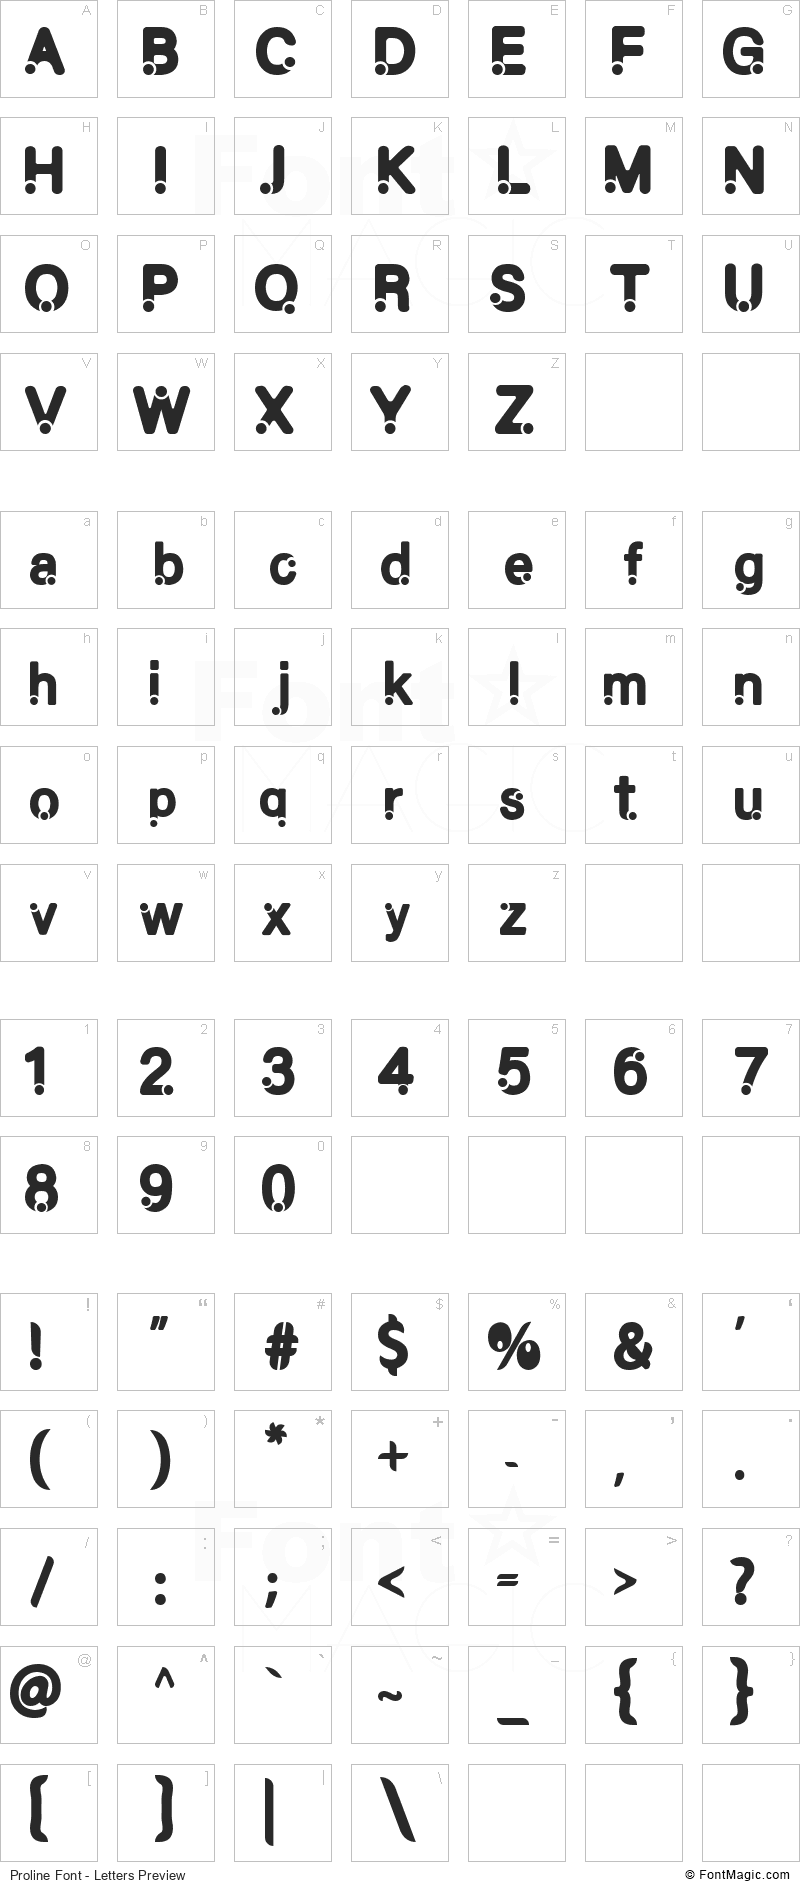 Proline Font - All Latters Preview Chart